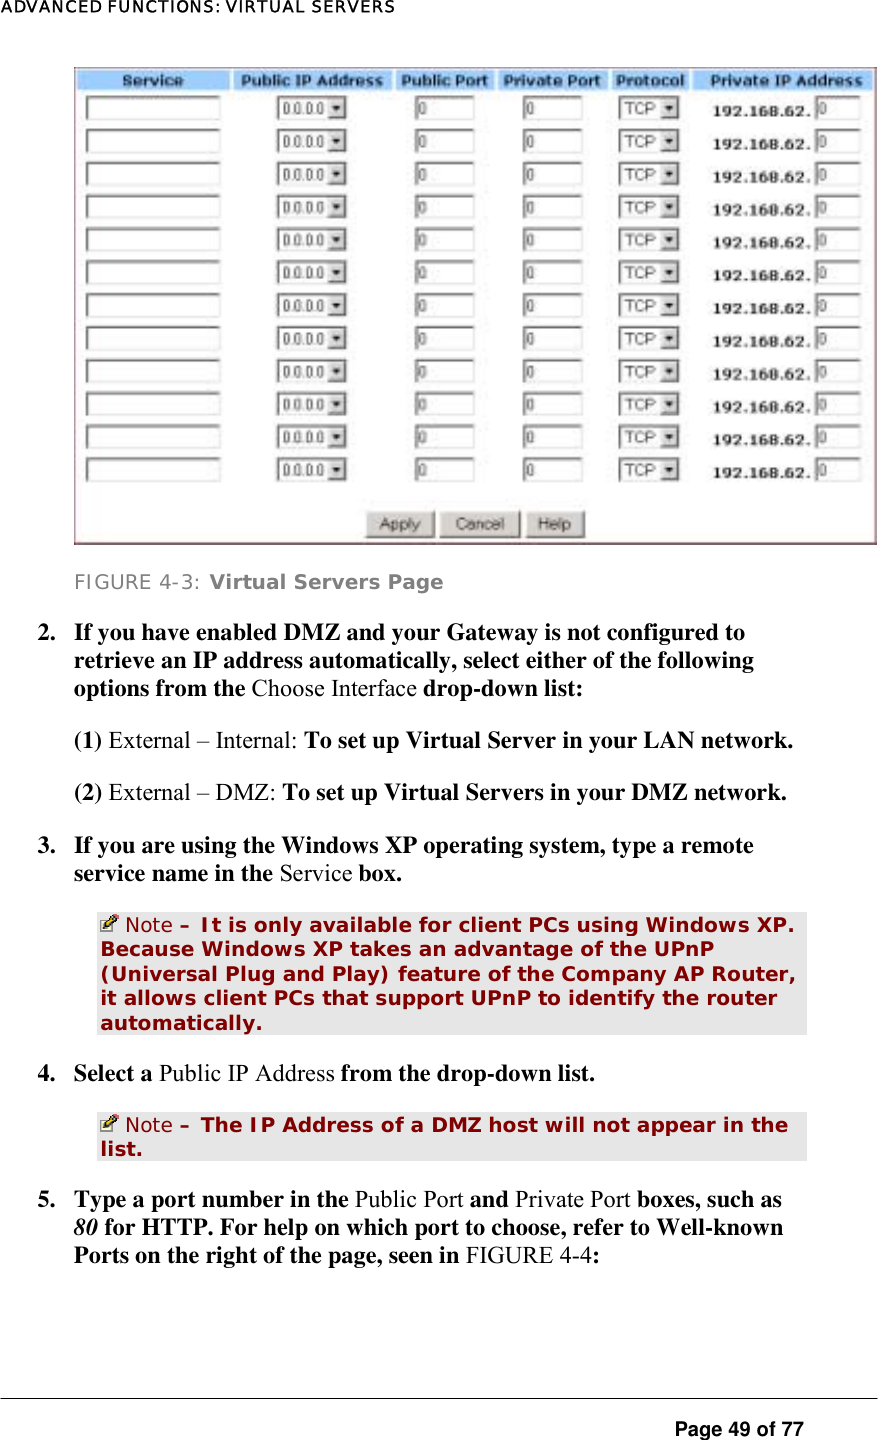 ADVANCED FUNCTIONS: VIRTUAL SERVERS  Page 49 of 77  FIGURE 4-3: Virtual Servers Page 2.  If you have enabled DMZ and your Gateway is not configured to retrieve an IP address automatically, select either of the following options from the Choose Interface drop-down list:  (1) External – Internal: To set up Virtual Server in your LAN network.  (2) External – DMZ: To set up Virtual Servers in your DMZ network.  3.  If you are using the Windows XP operating system, type a remote service name in the Service box.   Note – It is only available for client PCs using Windows XP. Because Windows XP takes an advantage of the UPnP (Universal Plug and Play) feature of the Company AP Router, it allows client PCs that support UPnP to identify the router automatically.  4. Select a Public IP Address from the drop-down list.   Note – The IP Address of a DMZ host will not appear in the list.  5.  Type a port number in the Public Port and Private Port boxes, such as 80 for HTTP. For help on which port to choose, refer to Well-known Ports on the right of the page, seen in FIGURE 4-4:  